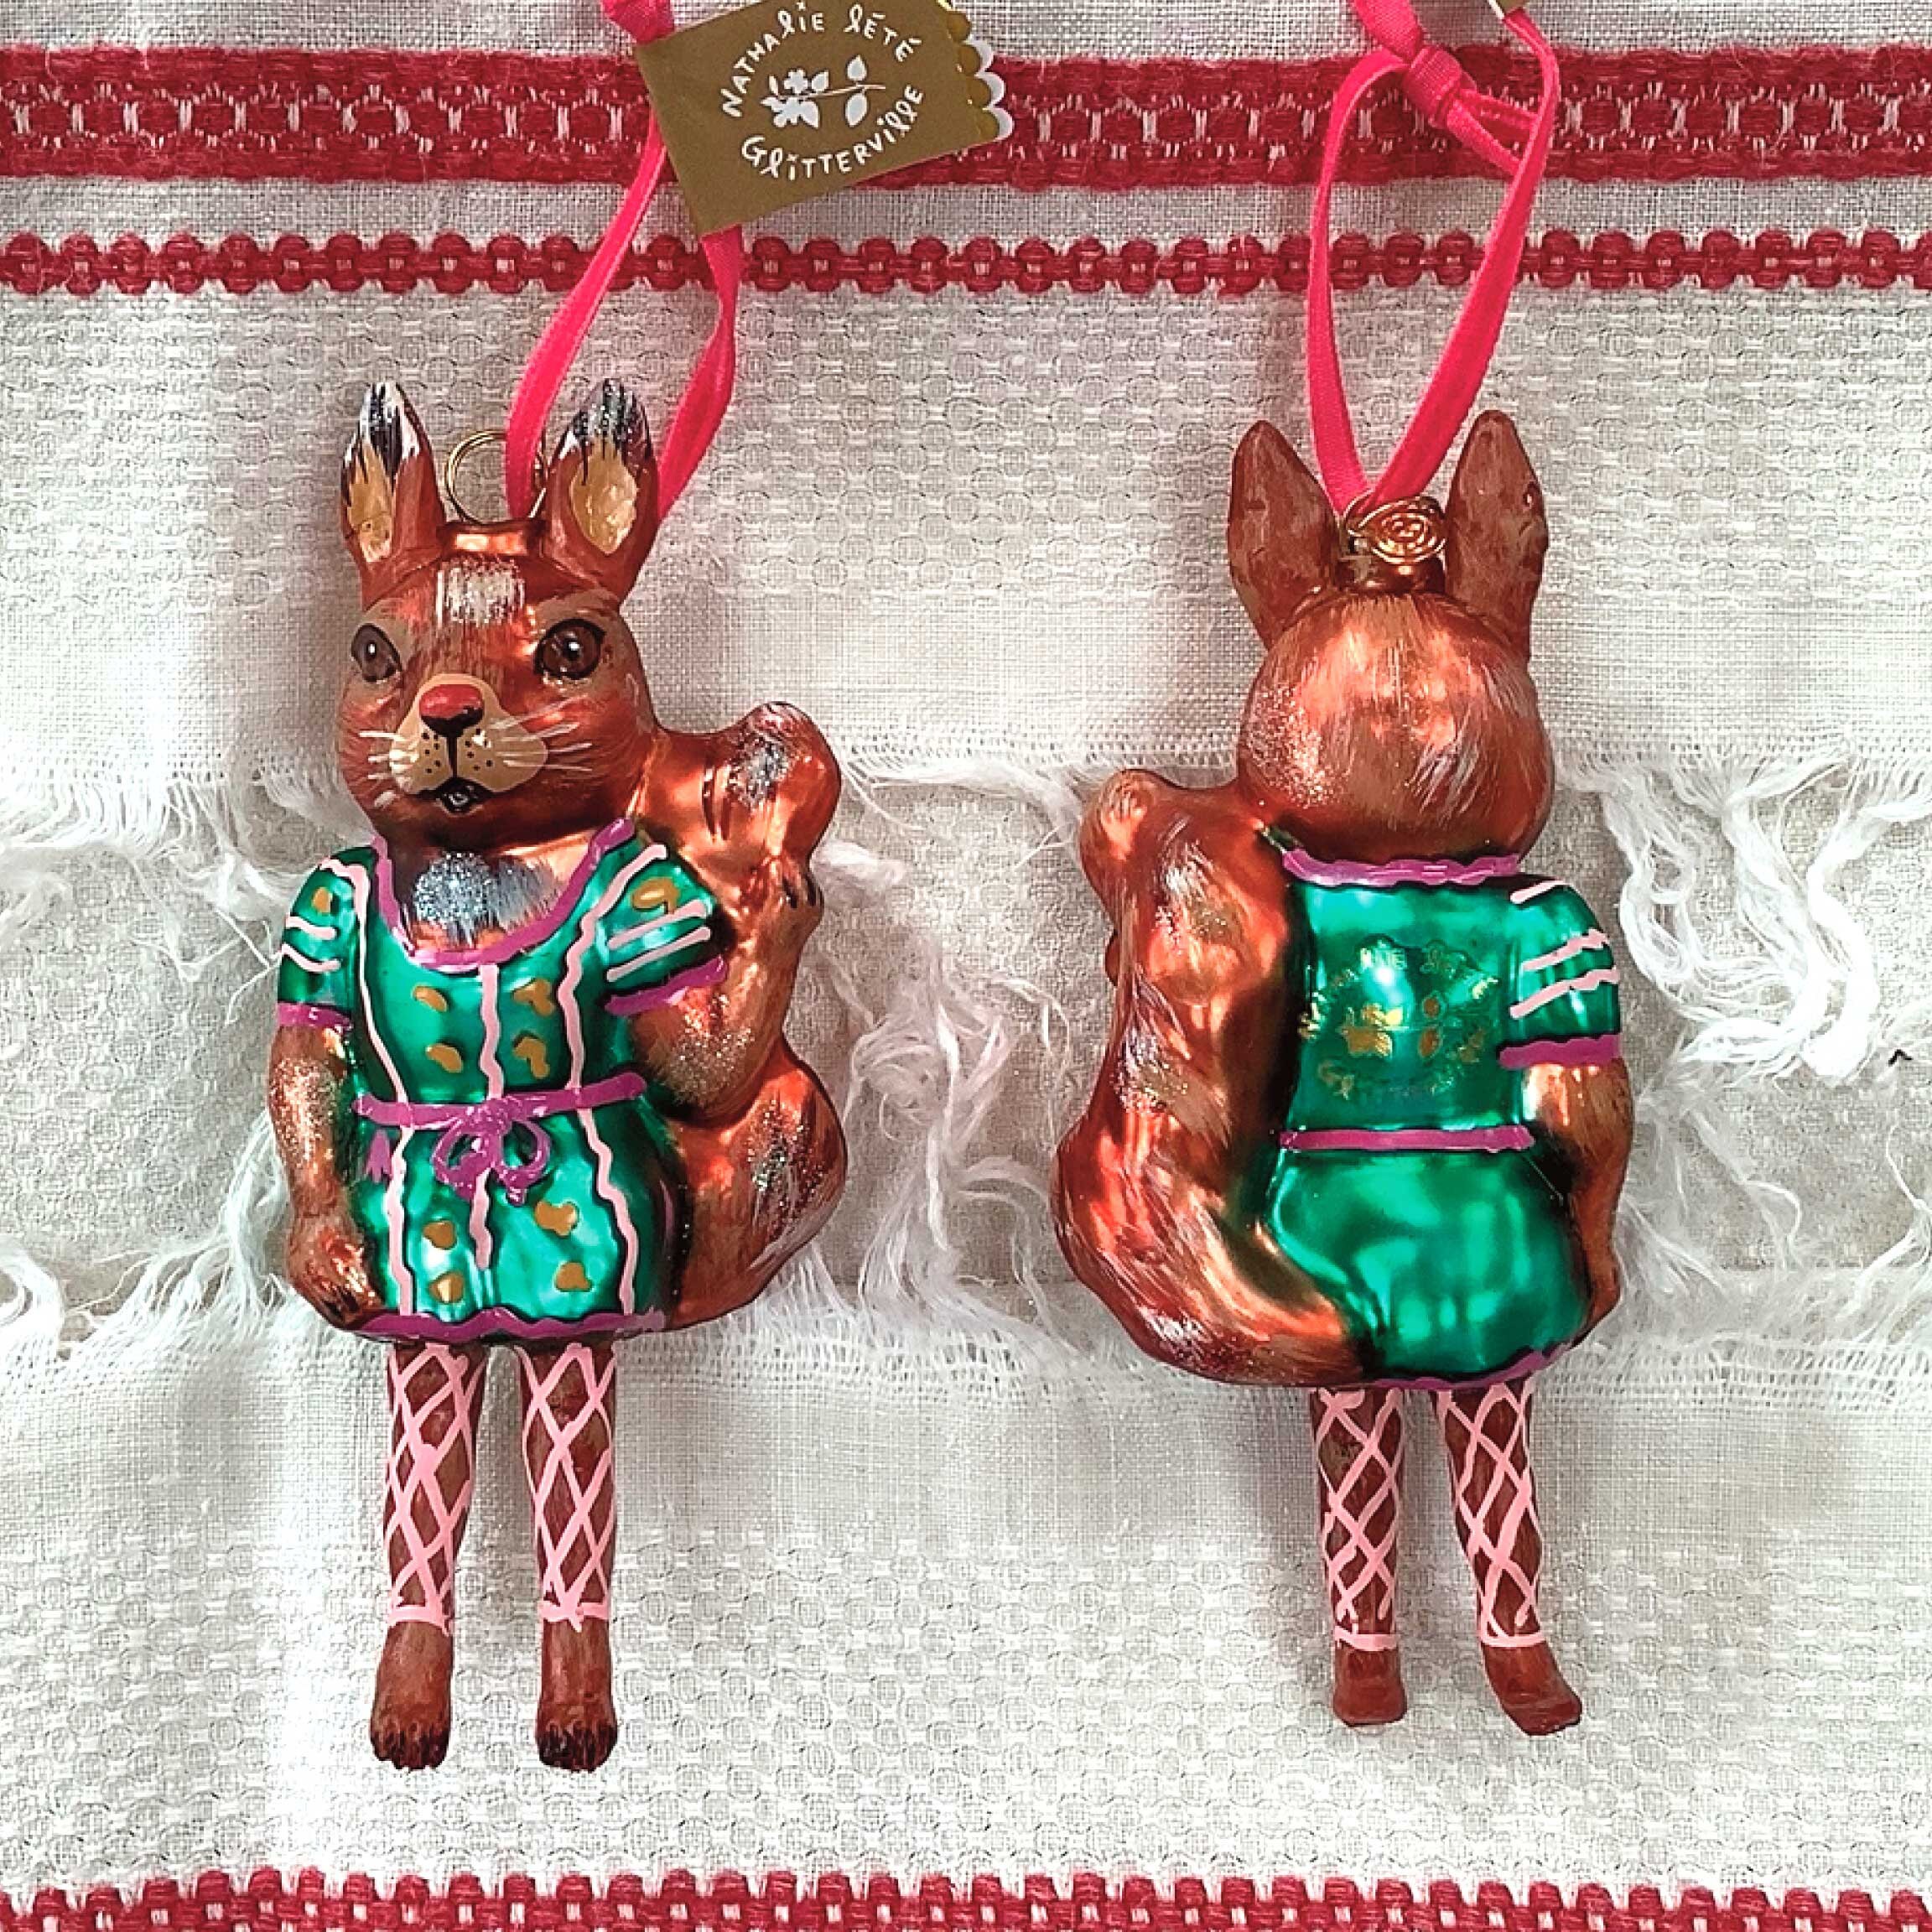 Nathalie Lete Dressed Dog Ornaments - The Periwinkle Shoppe